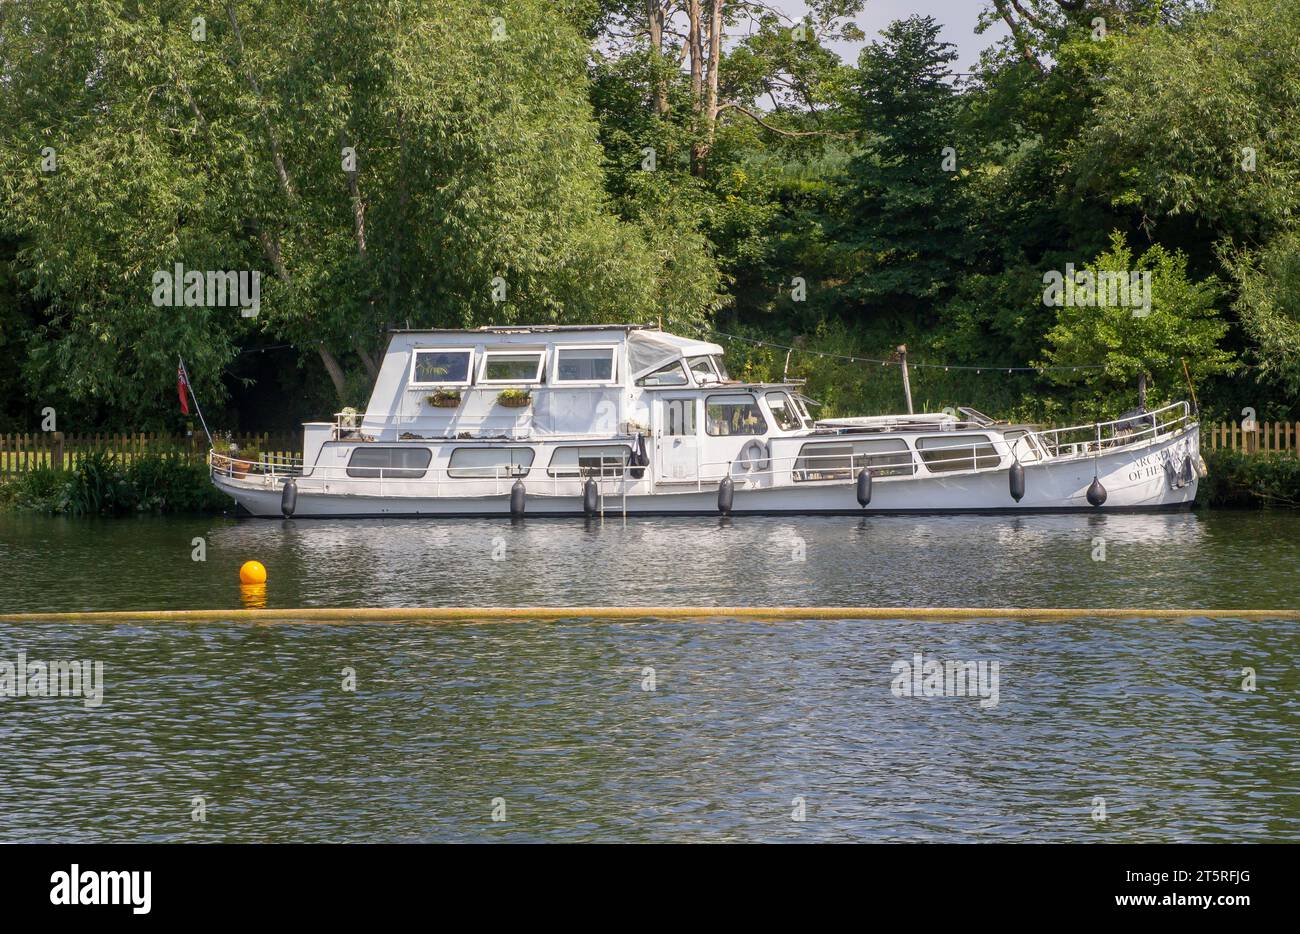 14 June 23 A beautiful motor cruiser berthed on the Thames at Henley-on-Thames in Oxfordshire, the venue for the Royal Regatta, on a fine summer after Stock Photo